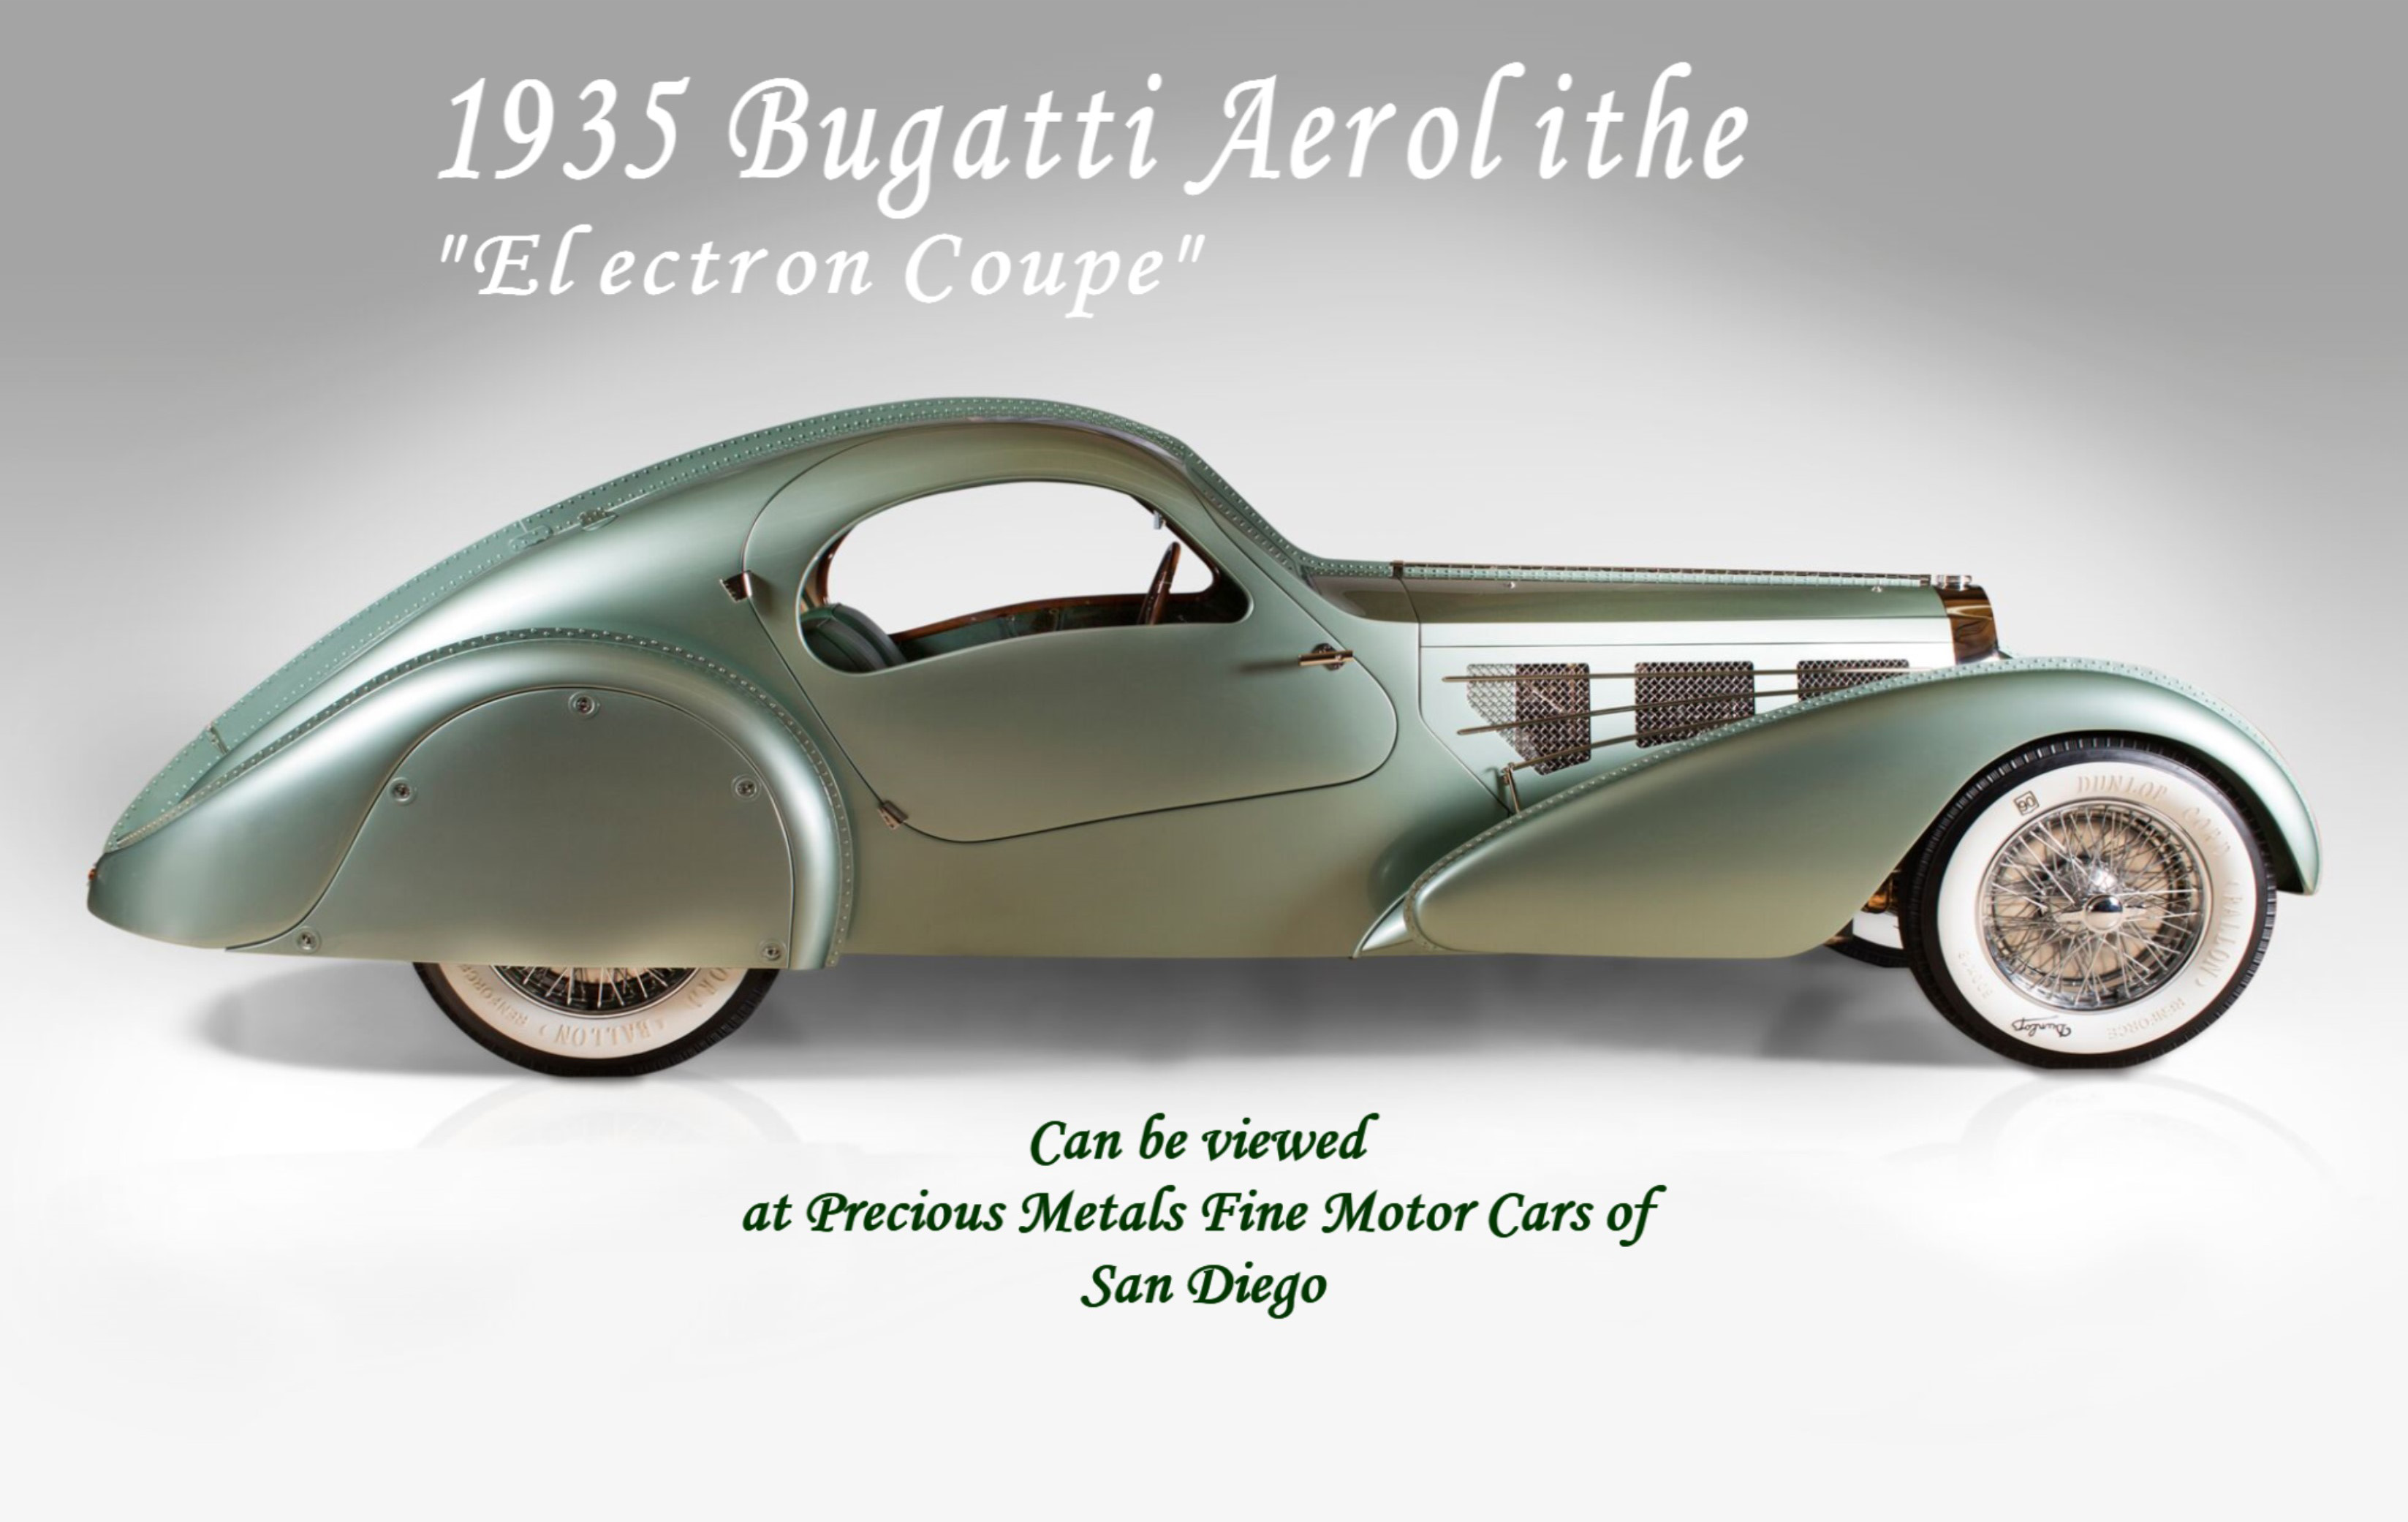 1935 Bugatti Aerolithe Electron Coupe Proudly Offered by Precious Metals Fine Motor Cars of San Diego